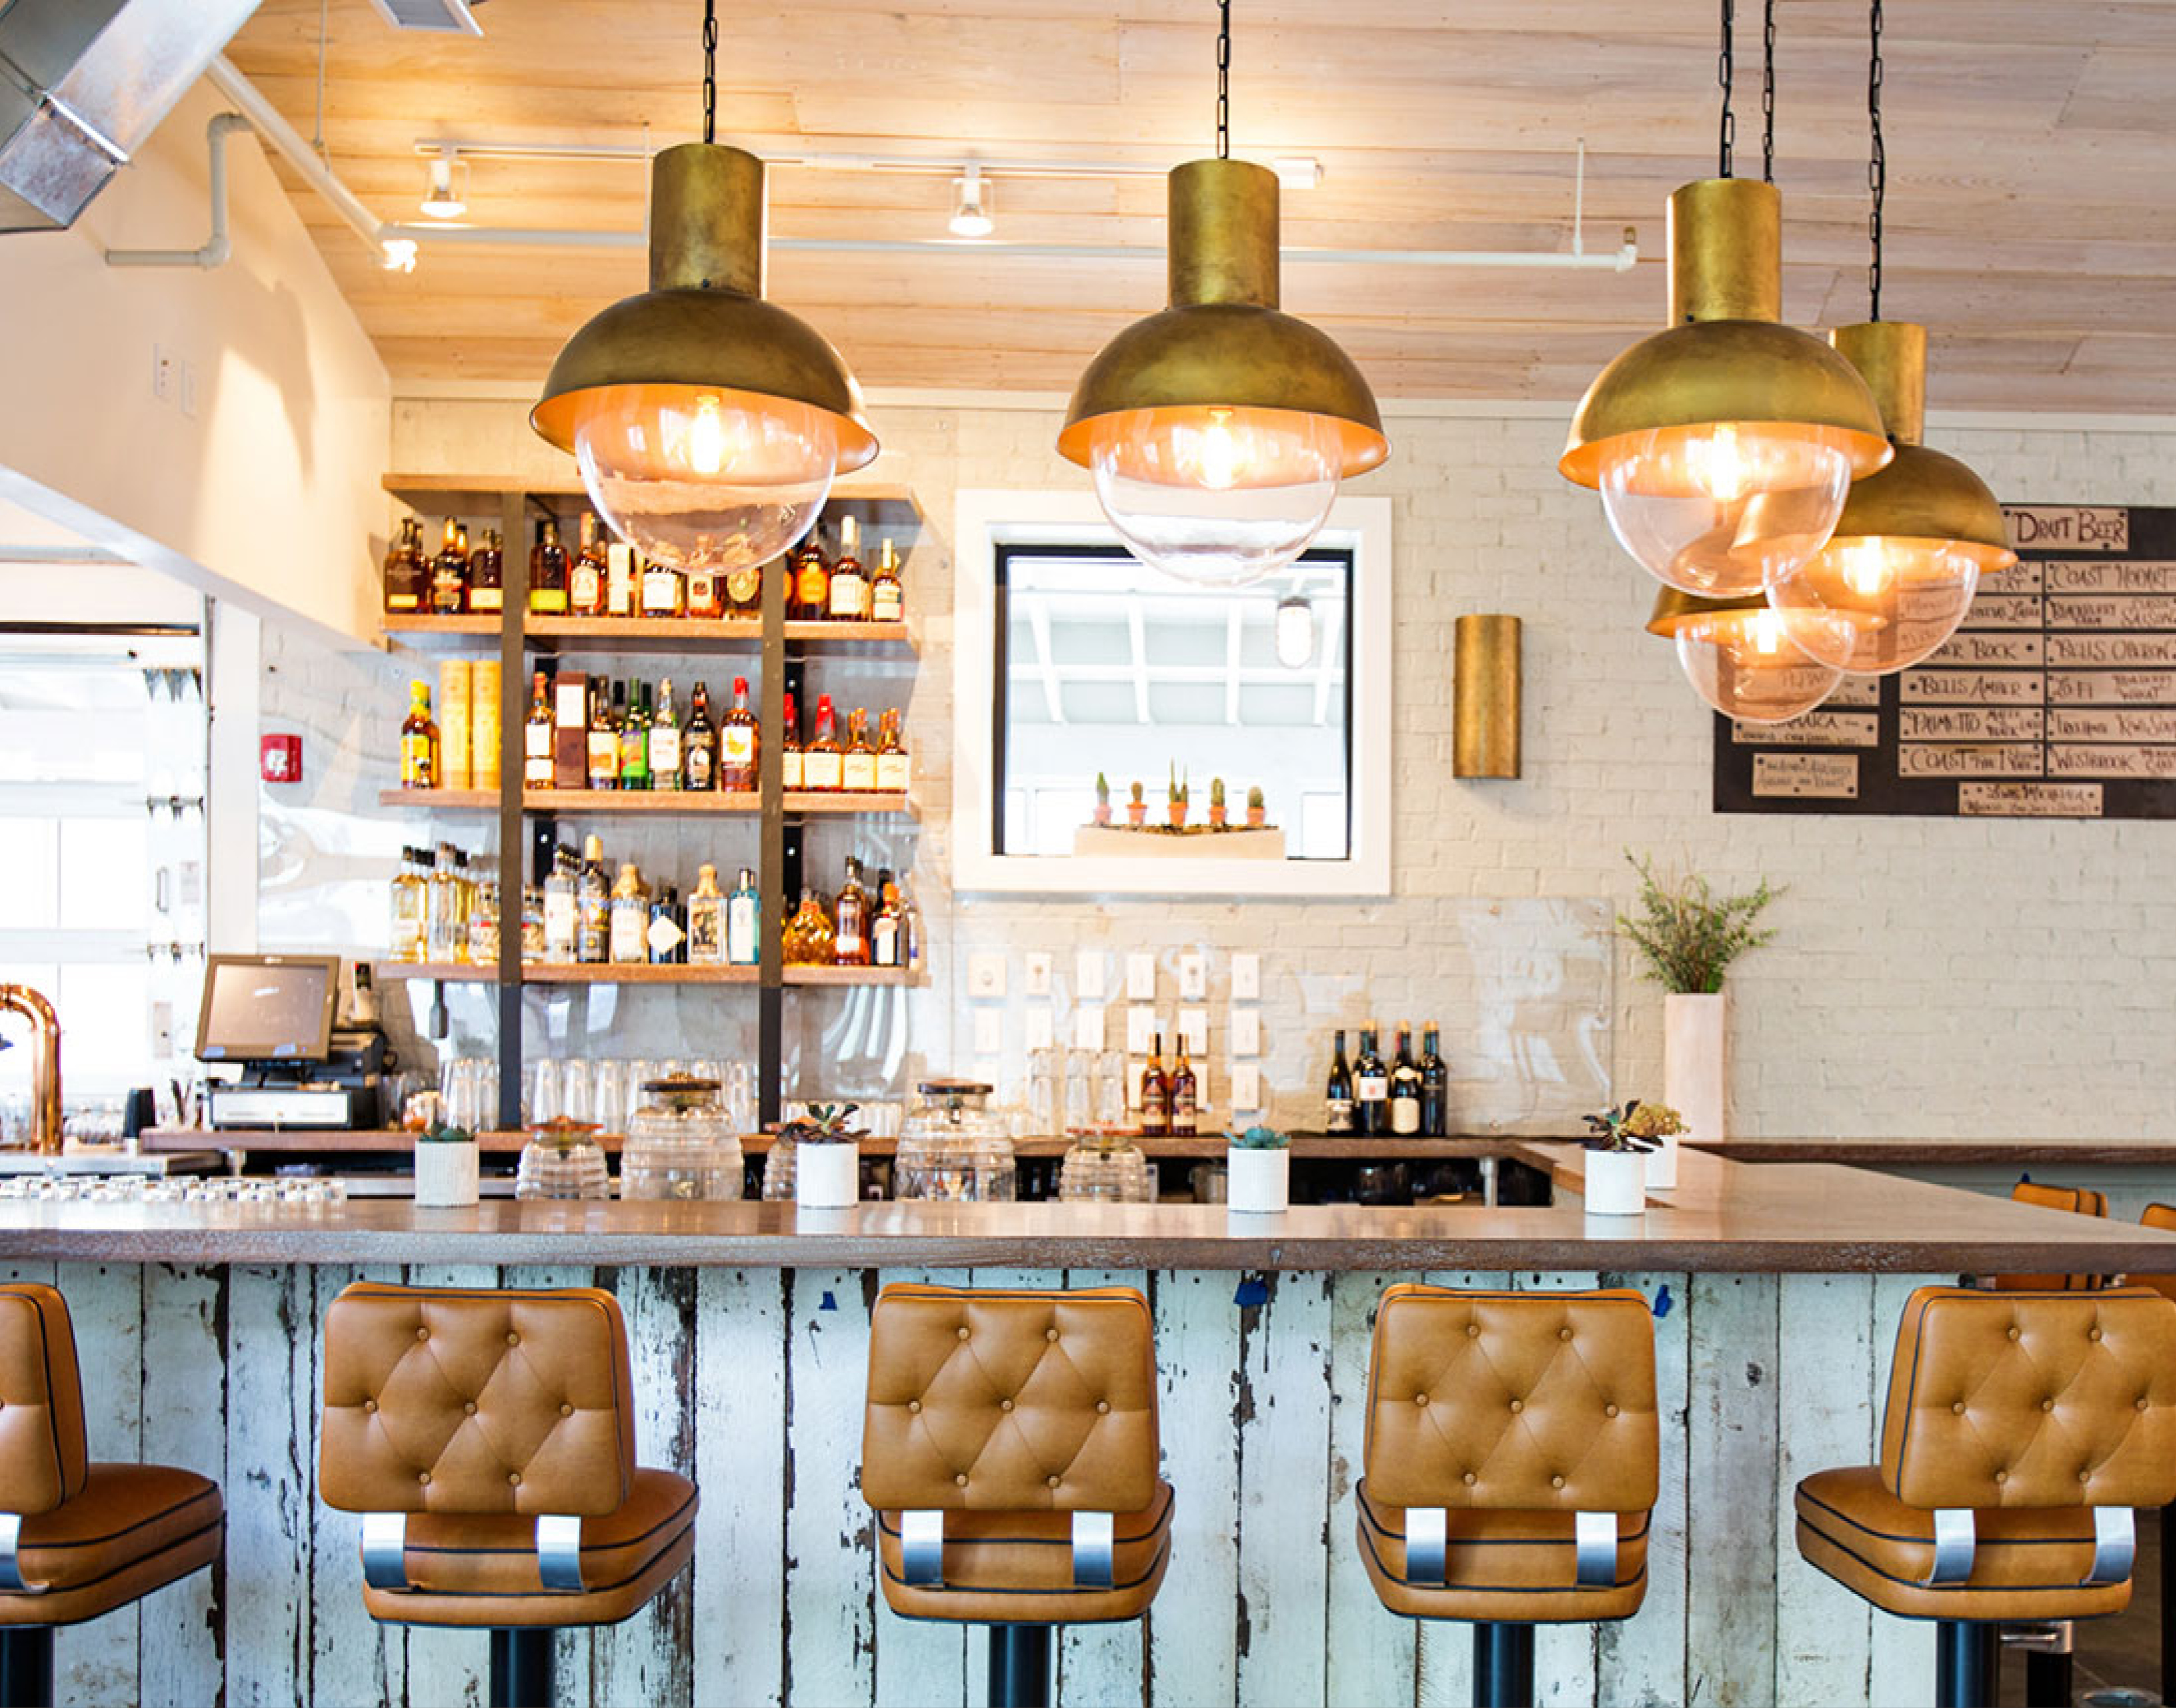 Lewis BBQ interior bar design with upholstered barstools